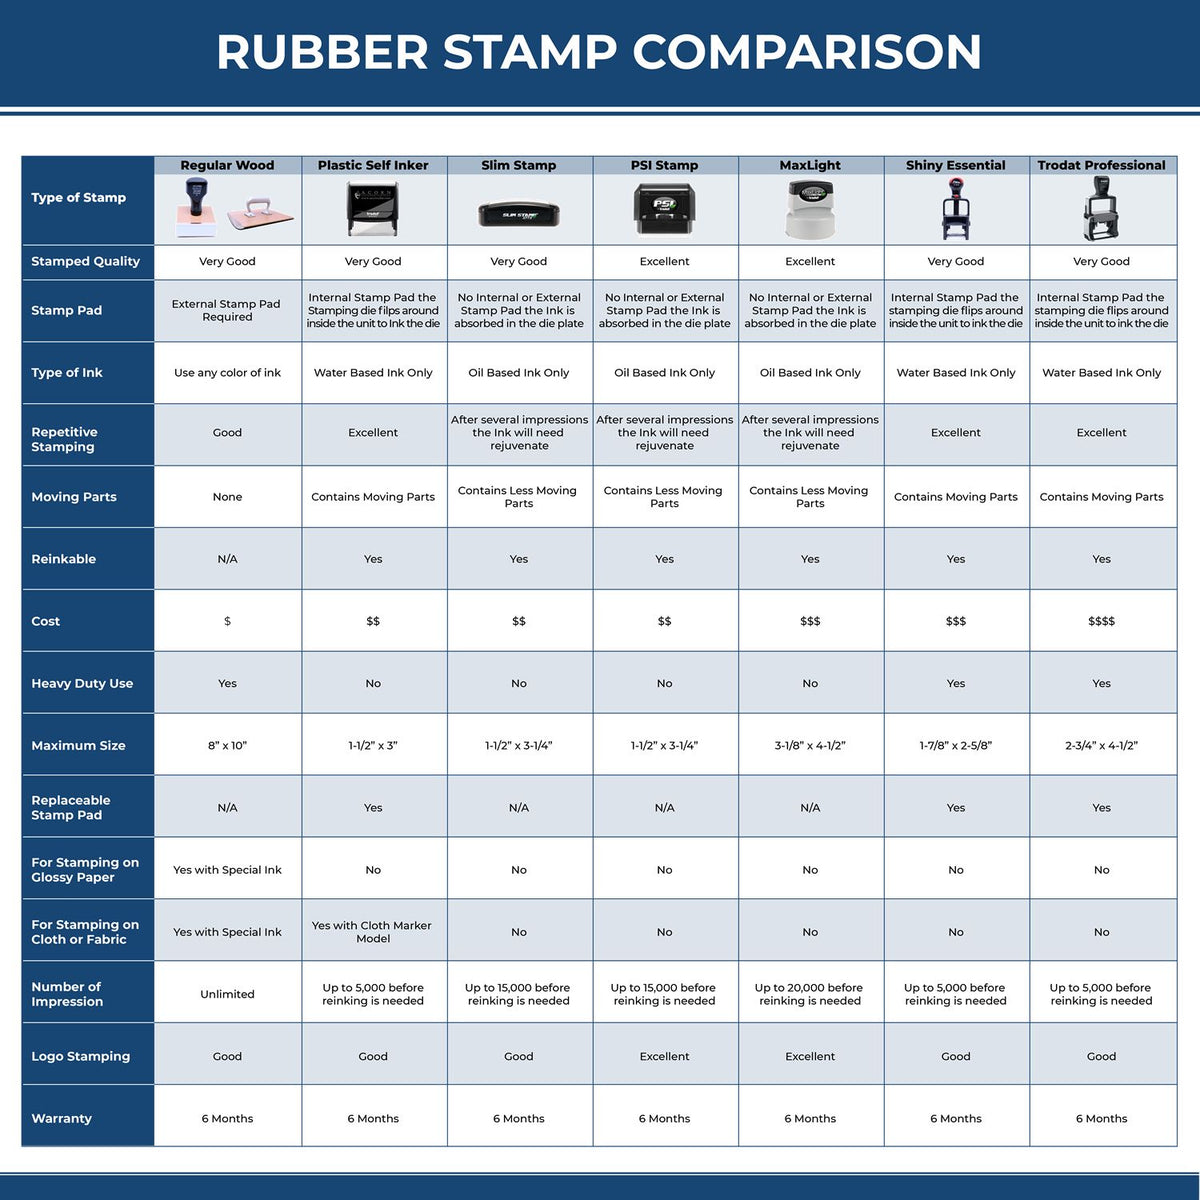 A comparison chart for the different types of mount models available for the Montana Professional Engineer Seal Stamp.